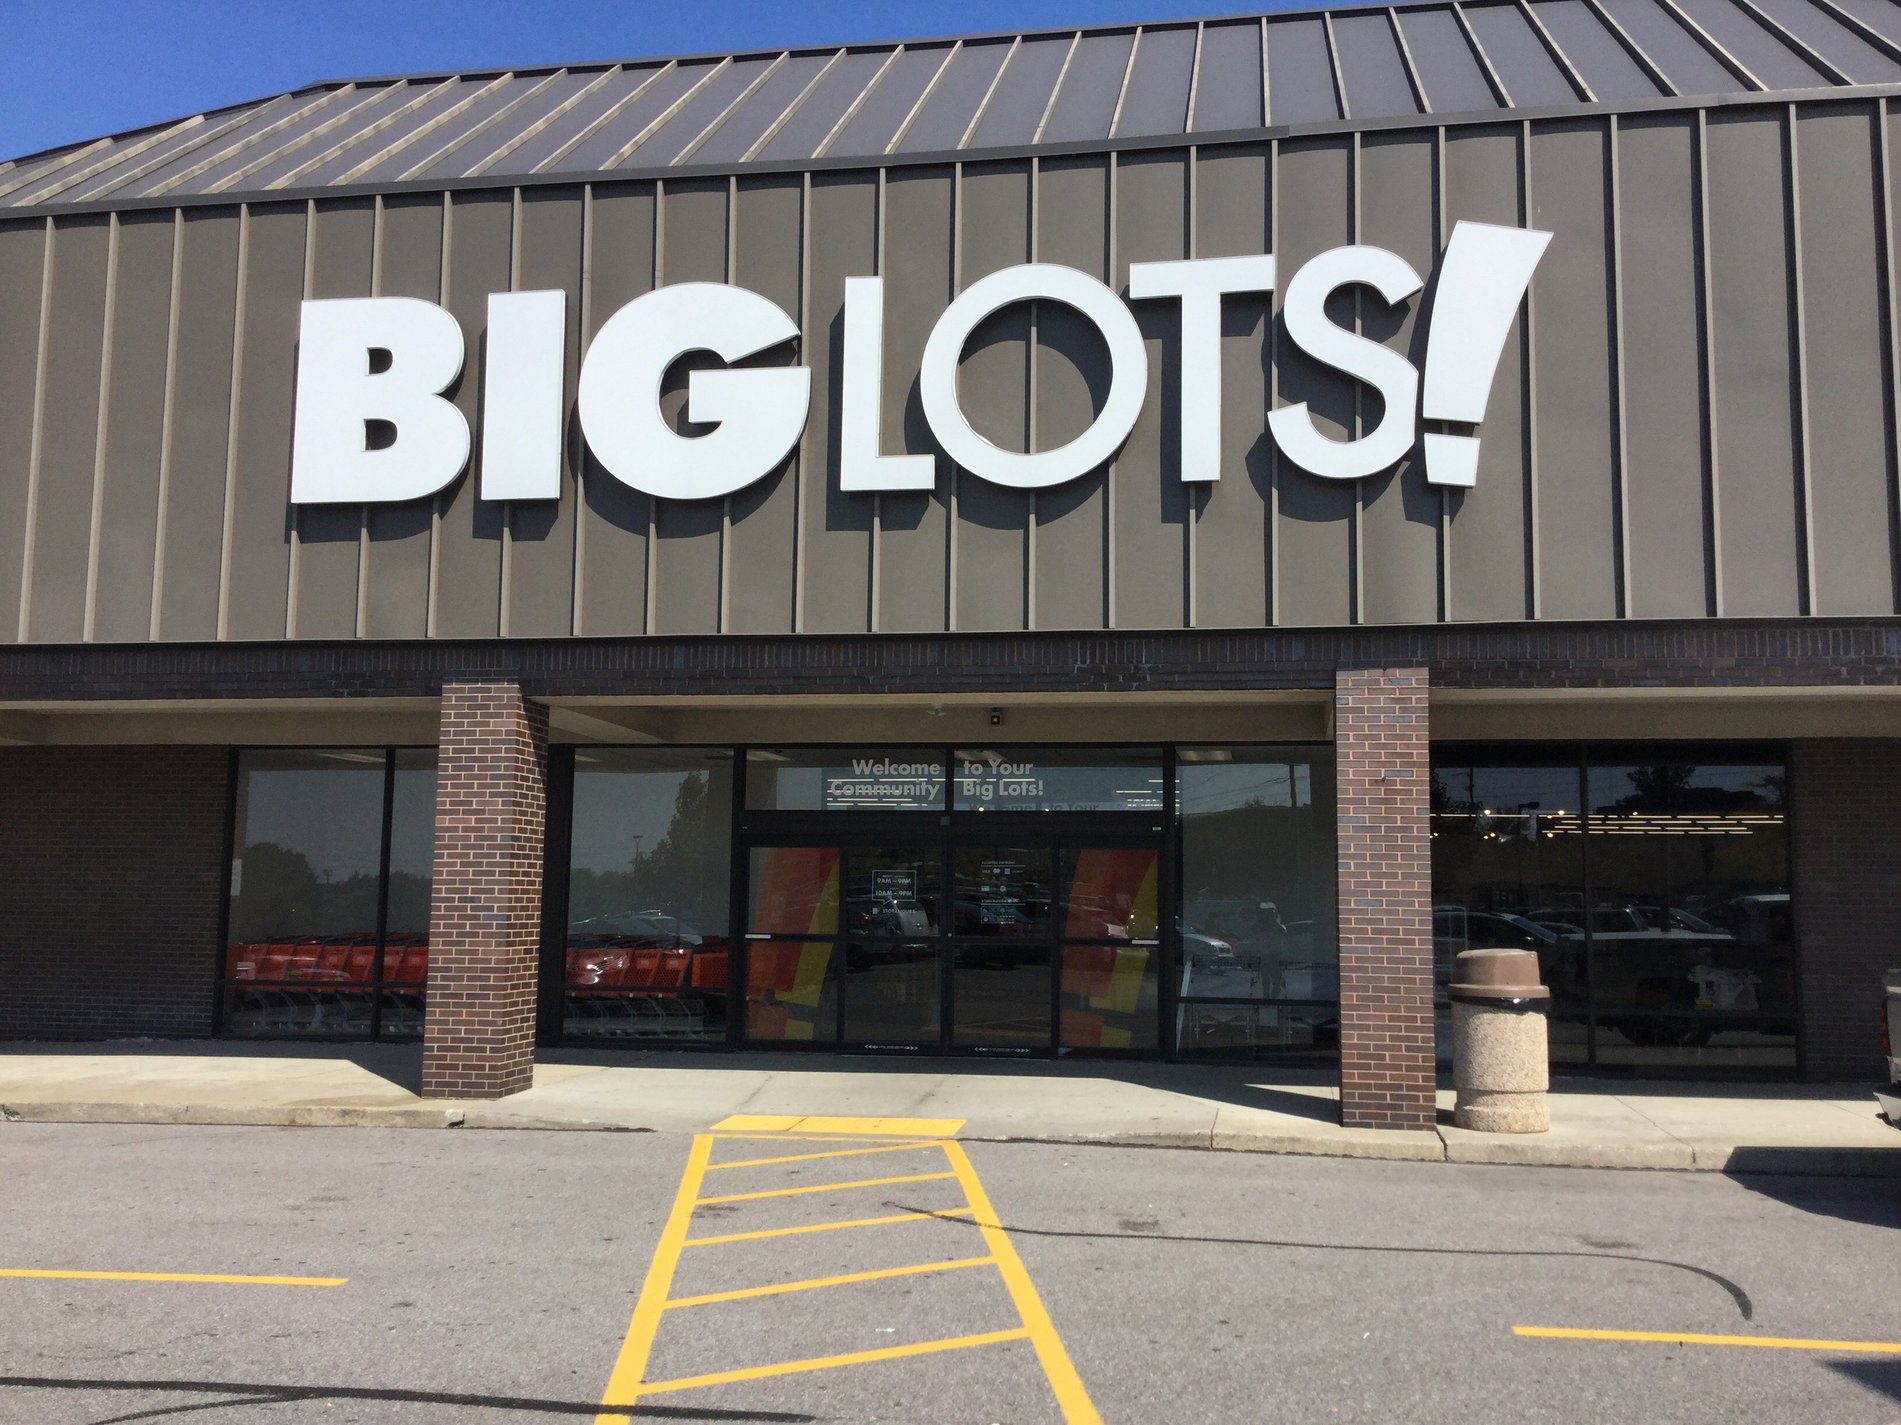 Visit the Big Lots in Beachwood, OH, Located on 24295 Chagrin Blvd.